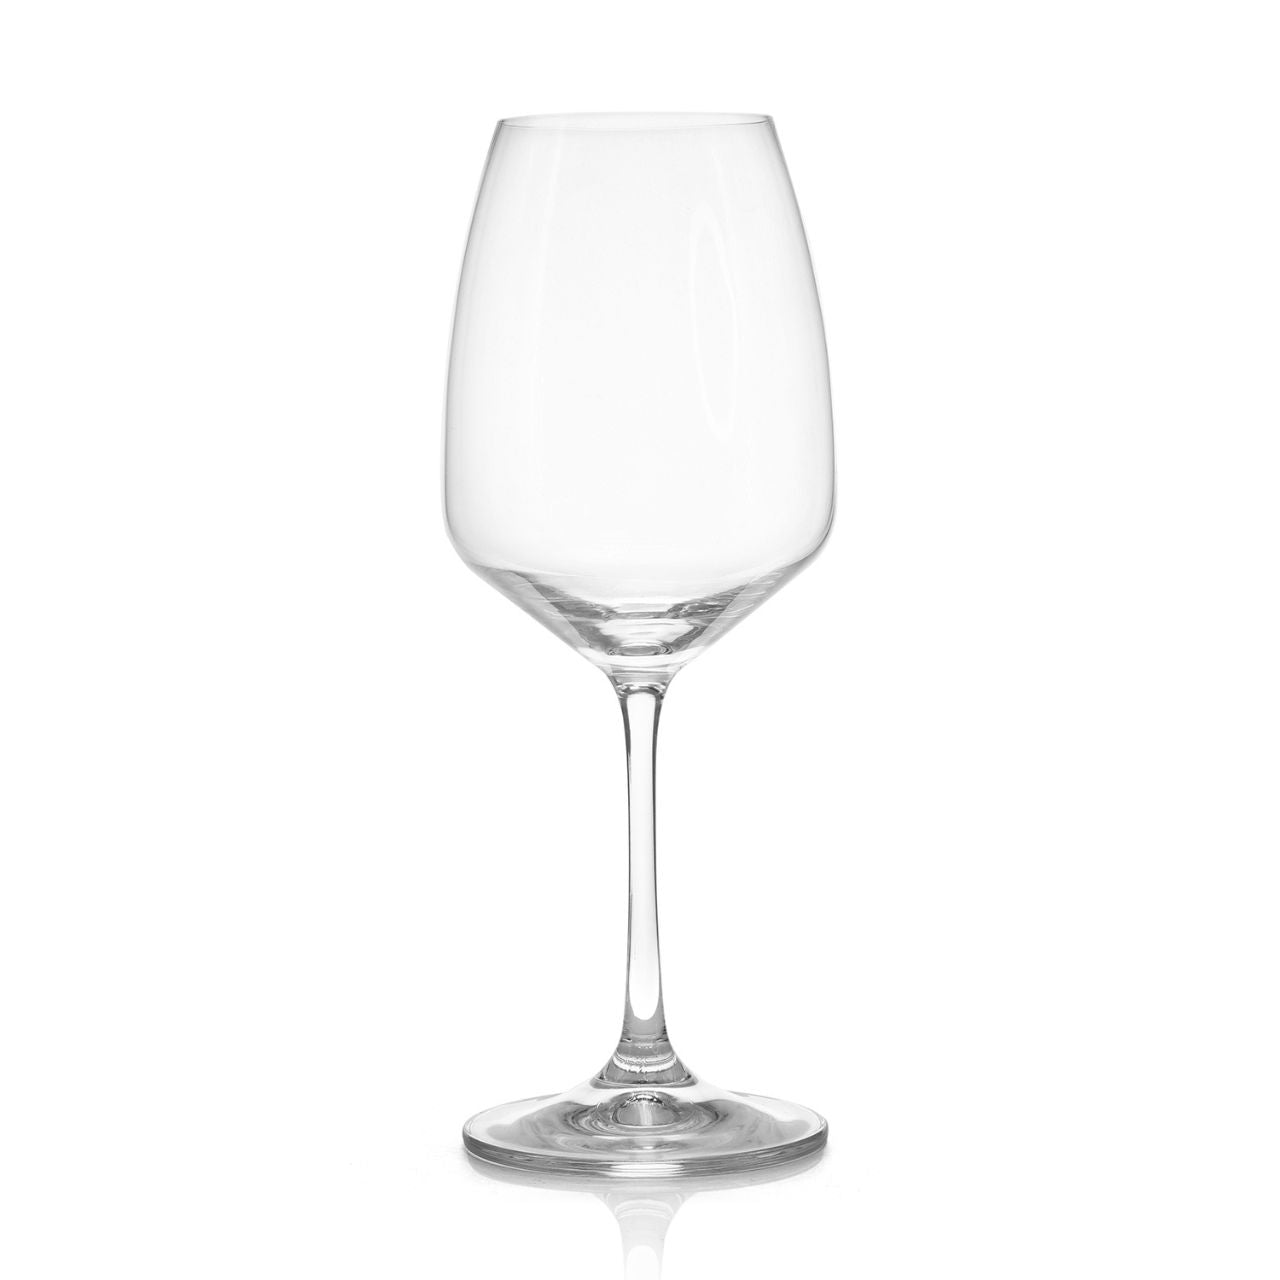 Prestige Wine Glasses Set of 6 by Tipperary  Tipperary Crystal has created a sparkling collection of crystal stemware and decanters for your drinking pleasure. These beautifully designed collections contain titanium and give additional strength to the glasses, making them less susceptible to scratching and chipping.